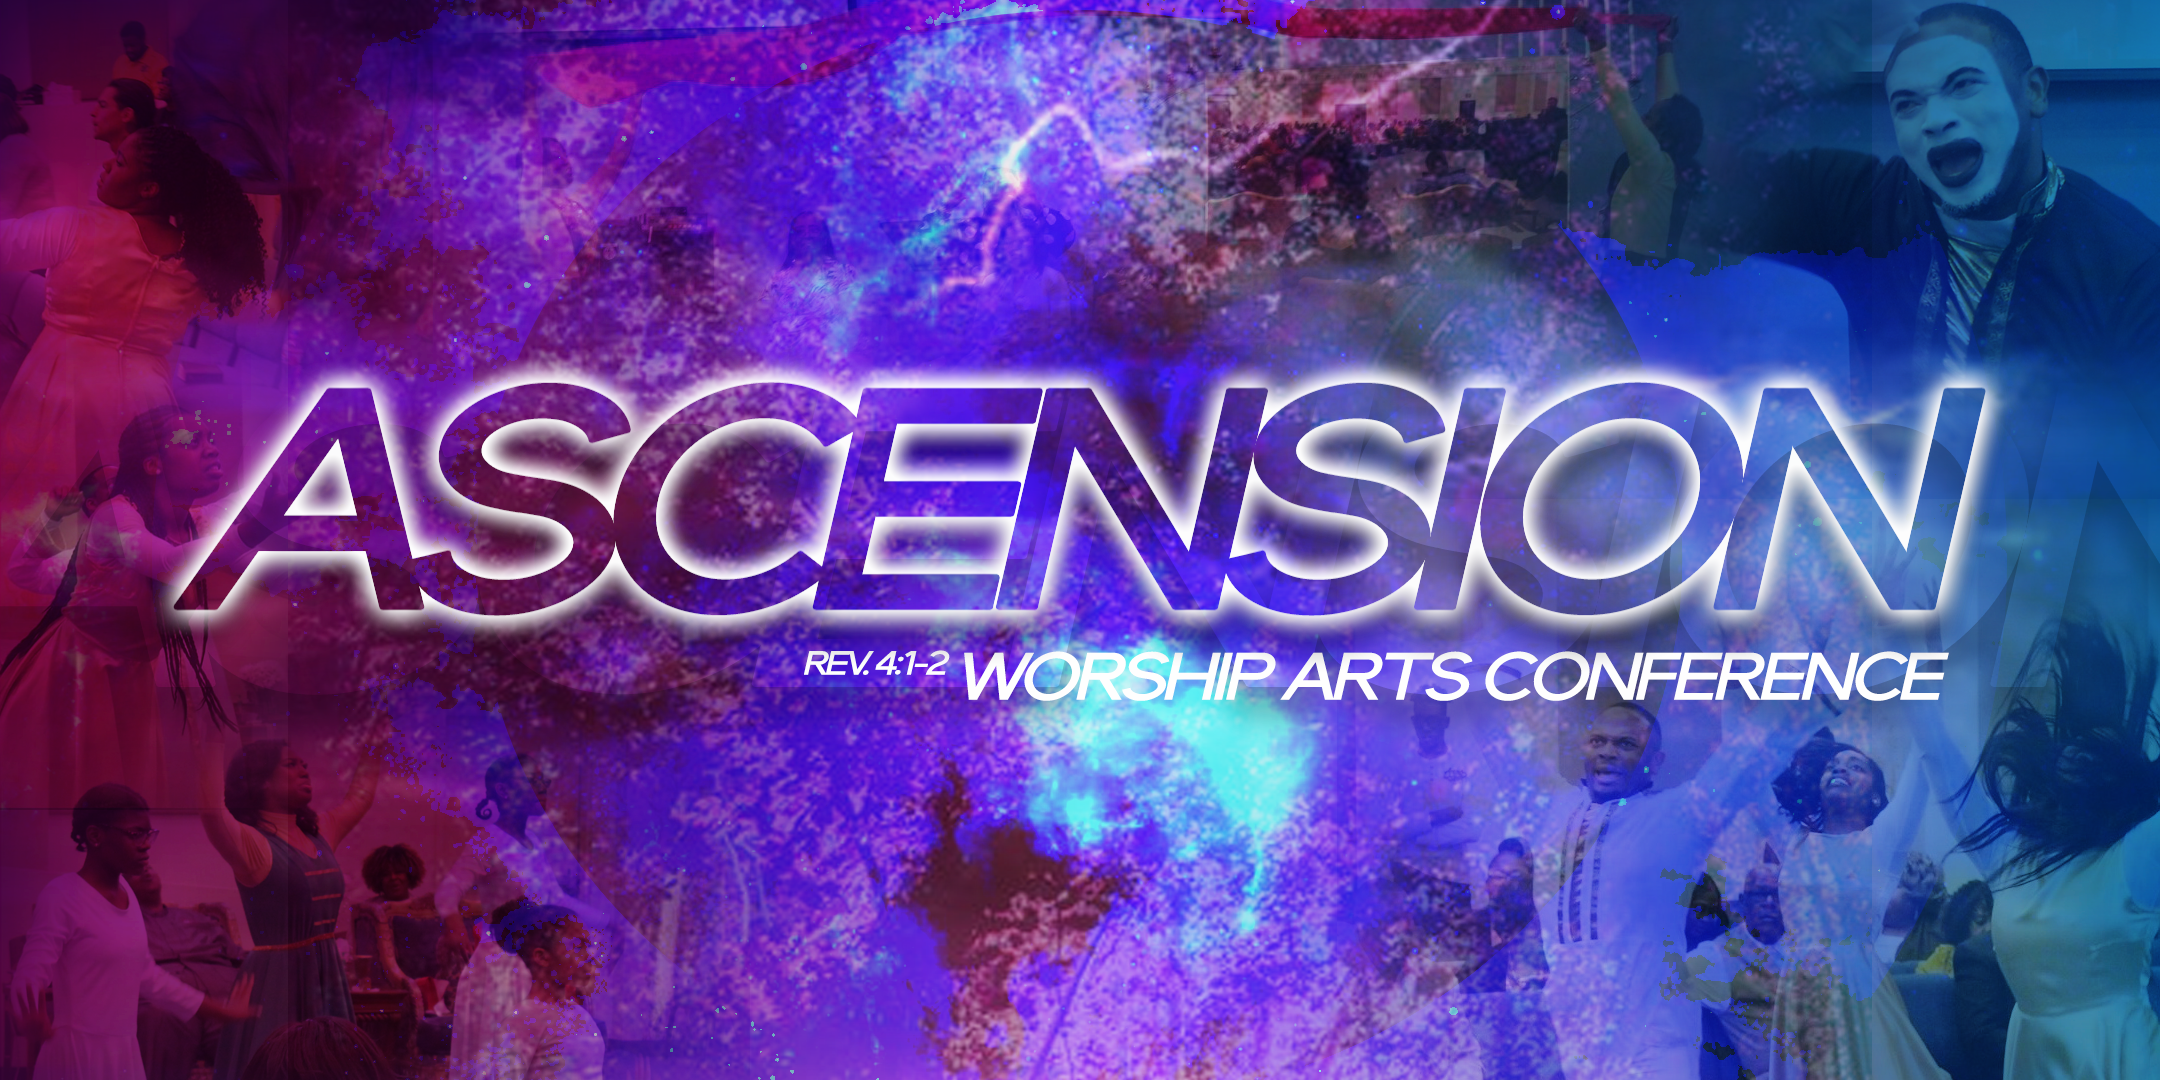 Ascension: Worship Arts Conference